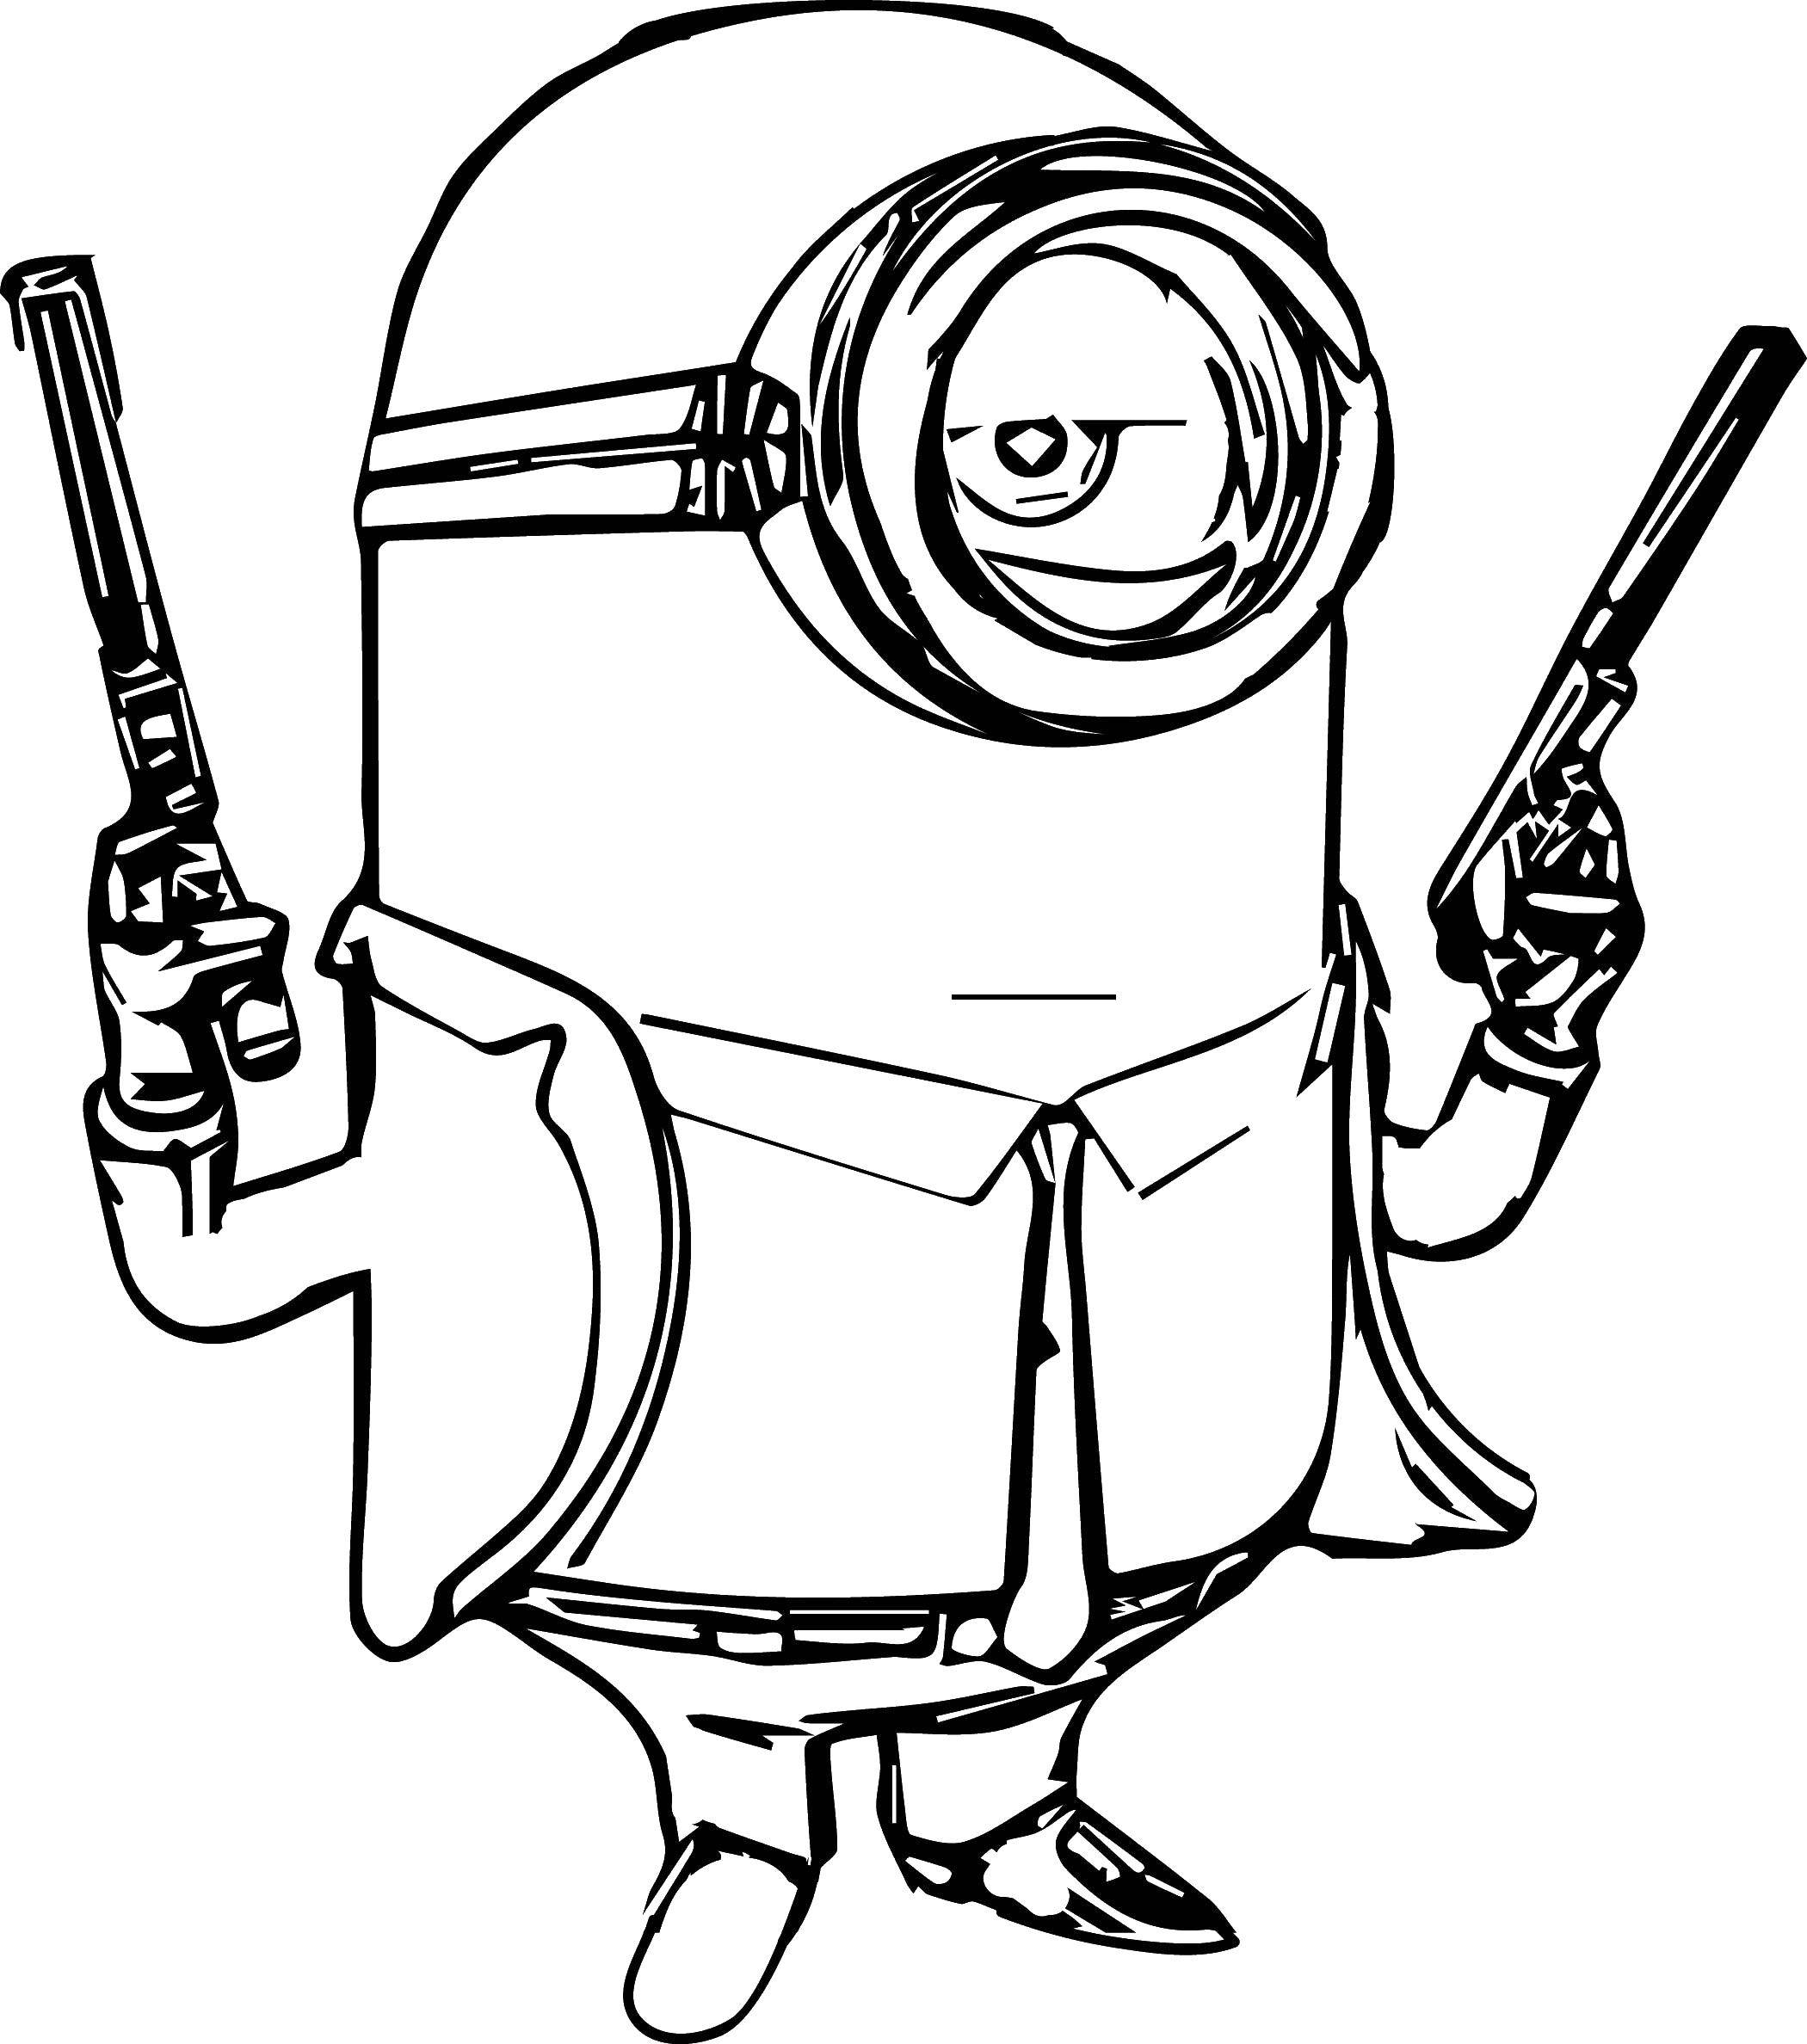 Coloring Threat minion. Category weapons. Tags:  Weapons, minion.